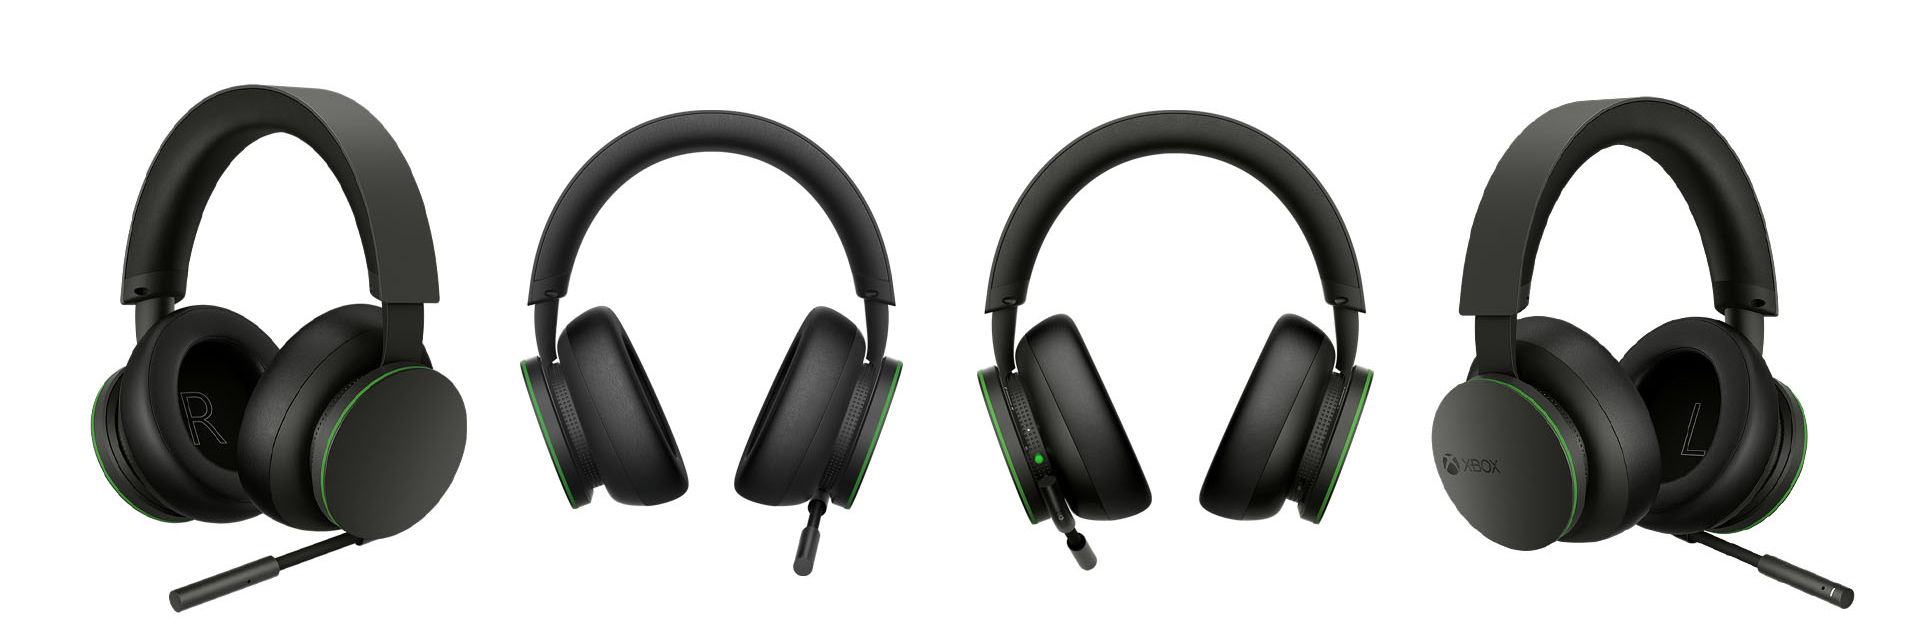 Headset renders. Love those big-arse volume dial controls on the cups.  (Image: Microsoft)